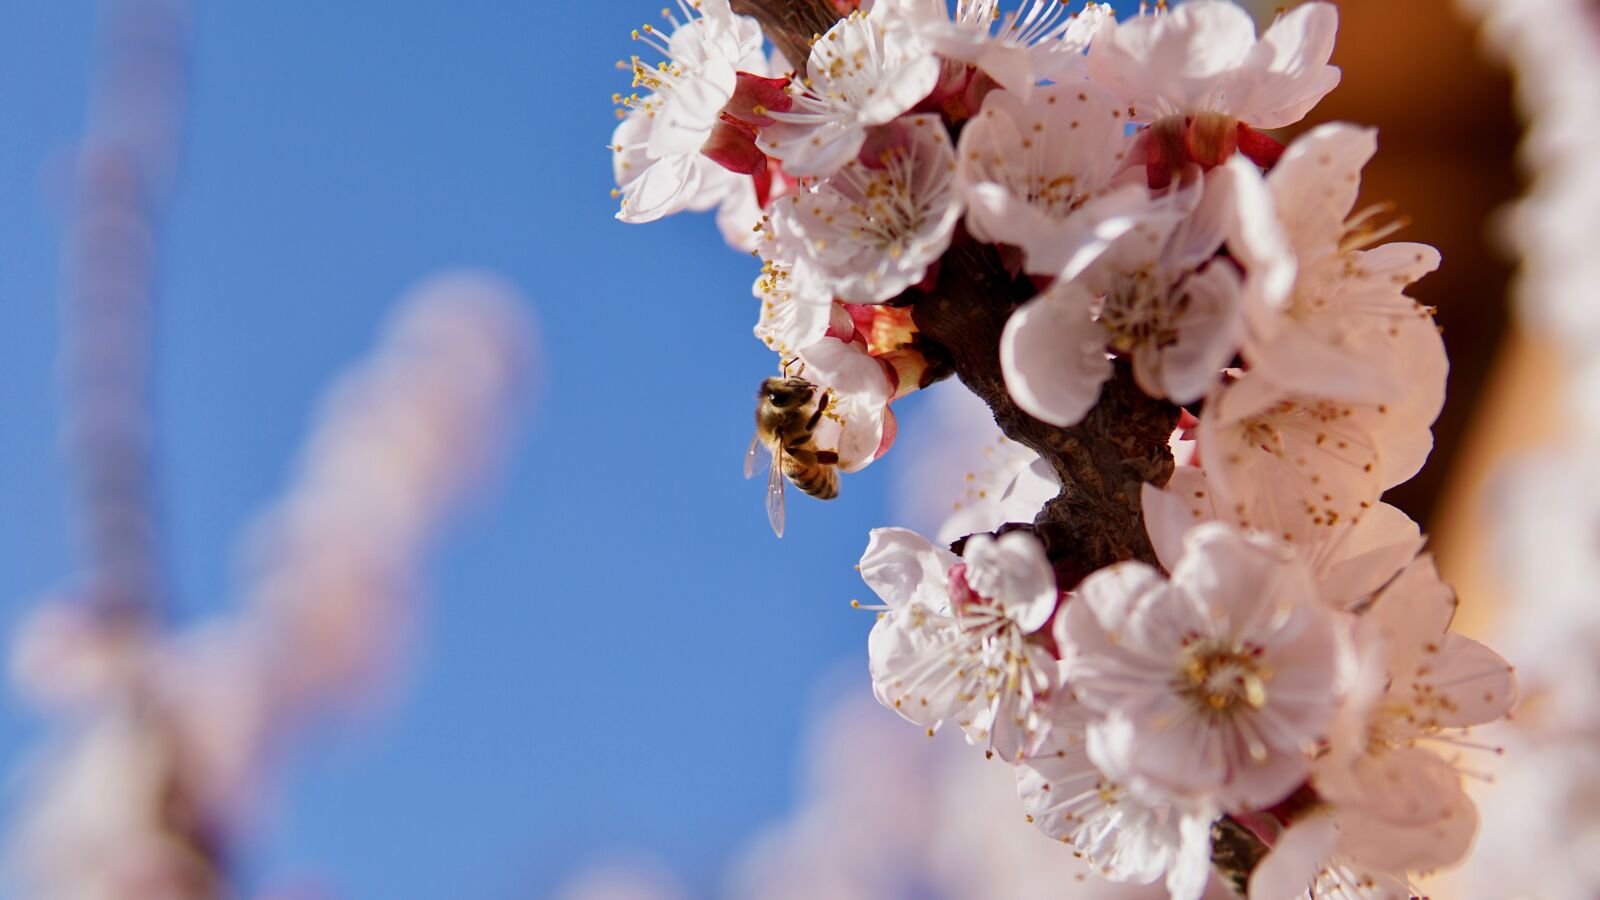 Sony a6300 sample photo. Flower, bees, spring photography